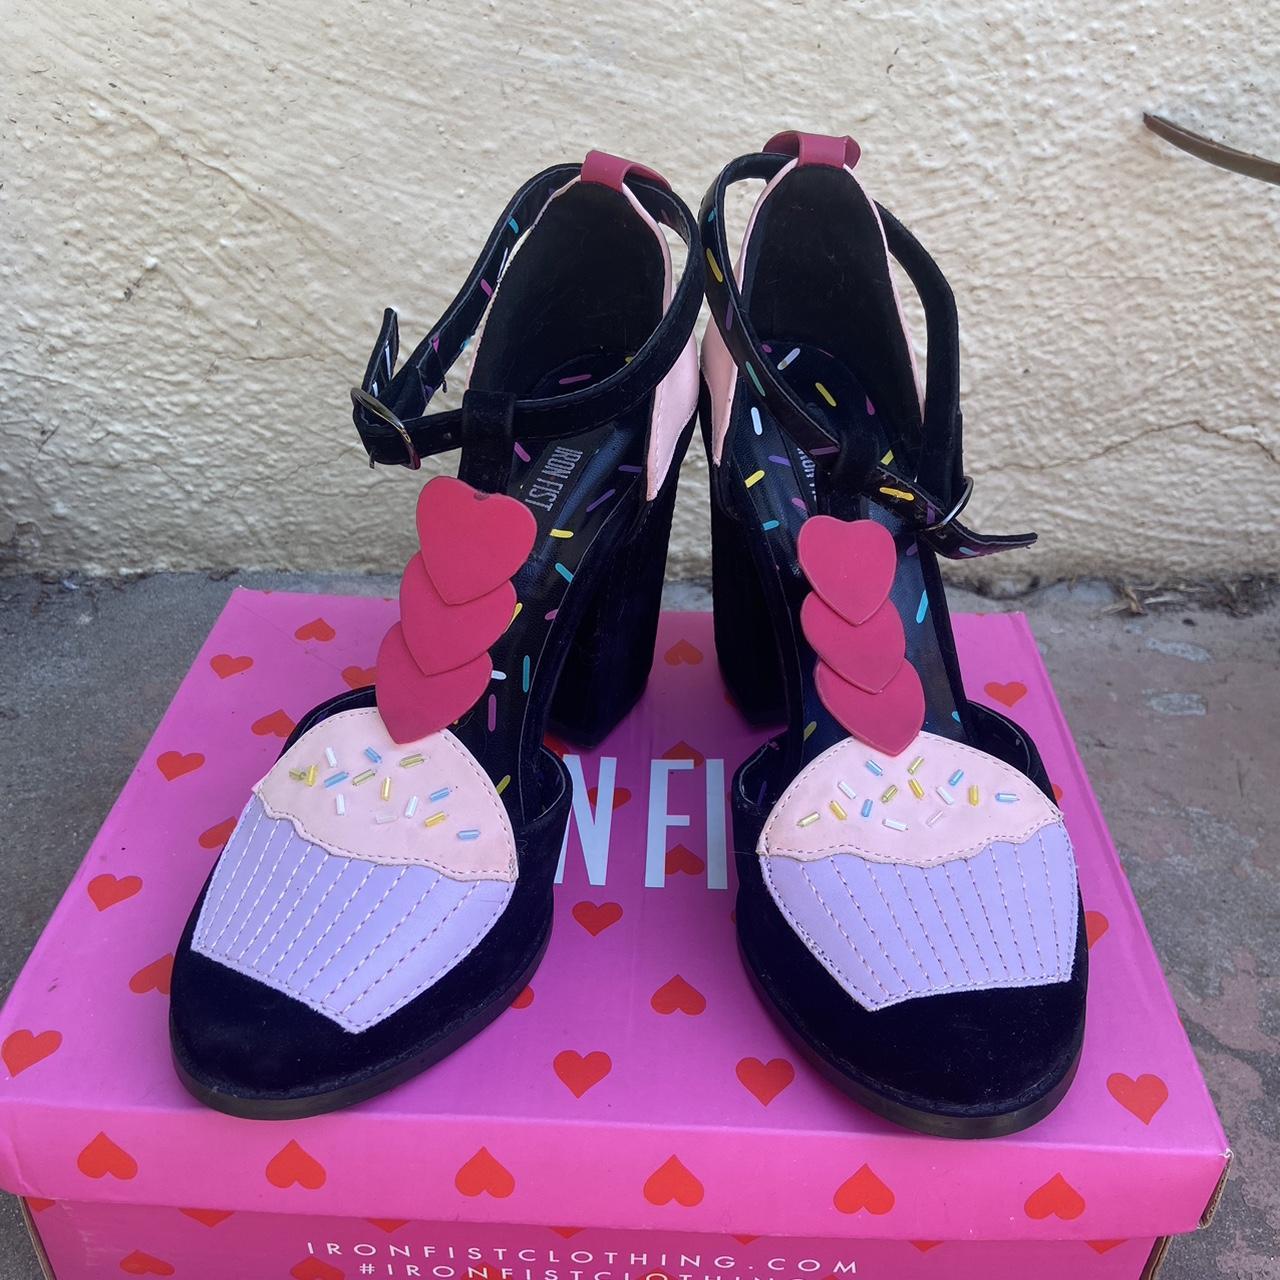 Iron Fist Women's Black and Pink Footwear